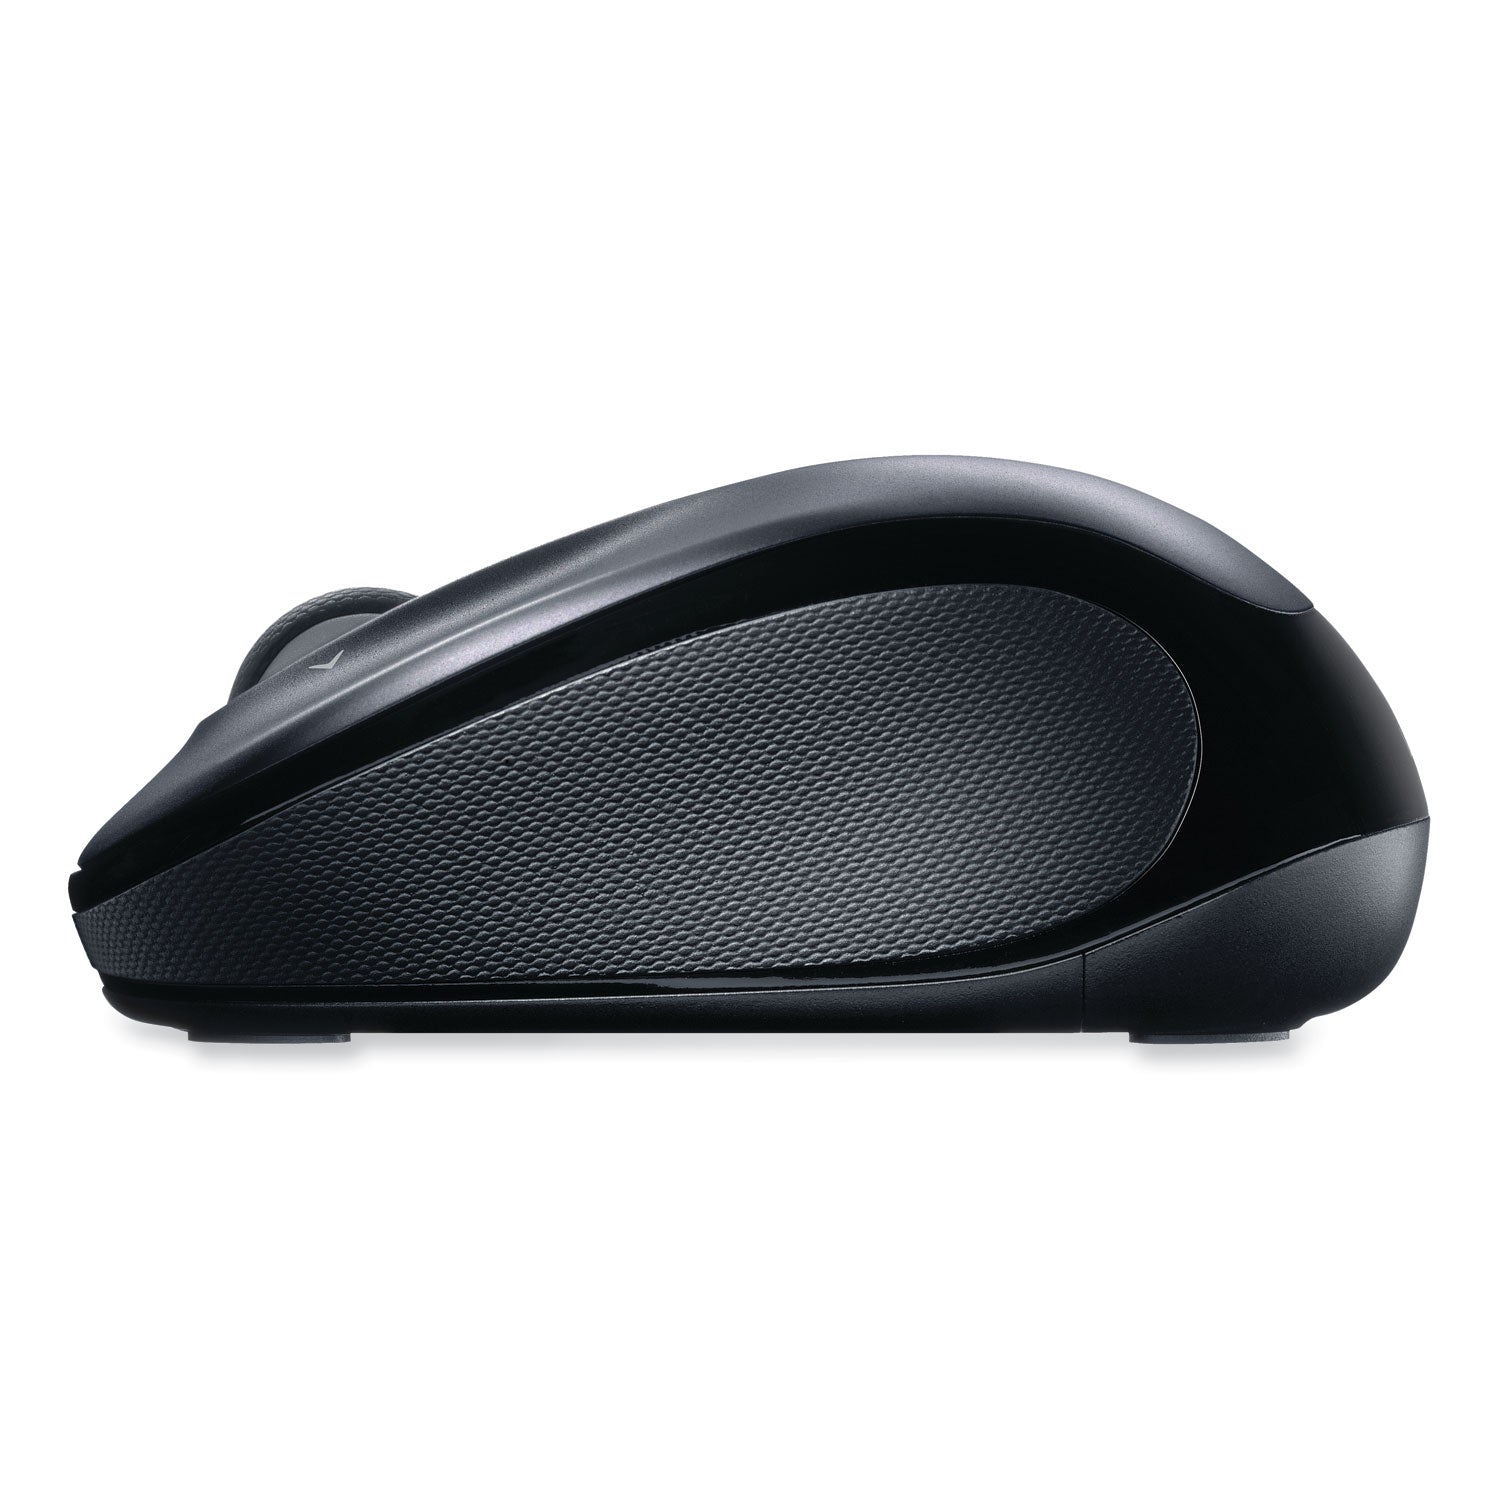 M325 Wireless Mouse, 2.4 GHz Frequency/30 ft Wireless Range, Left/Right Hand Use, Black - 